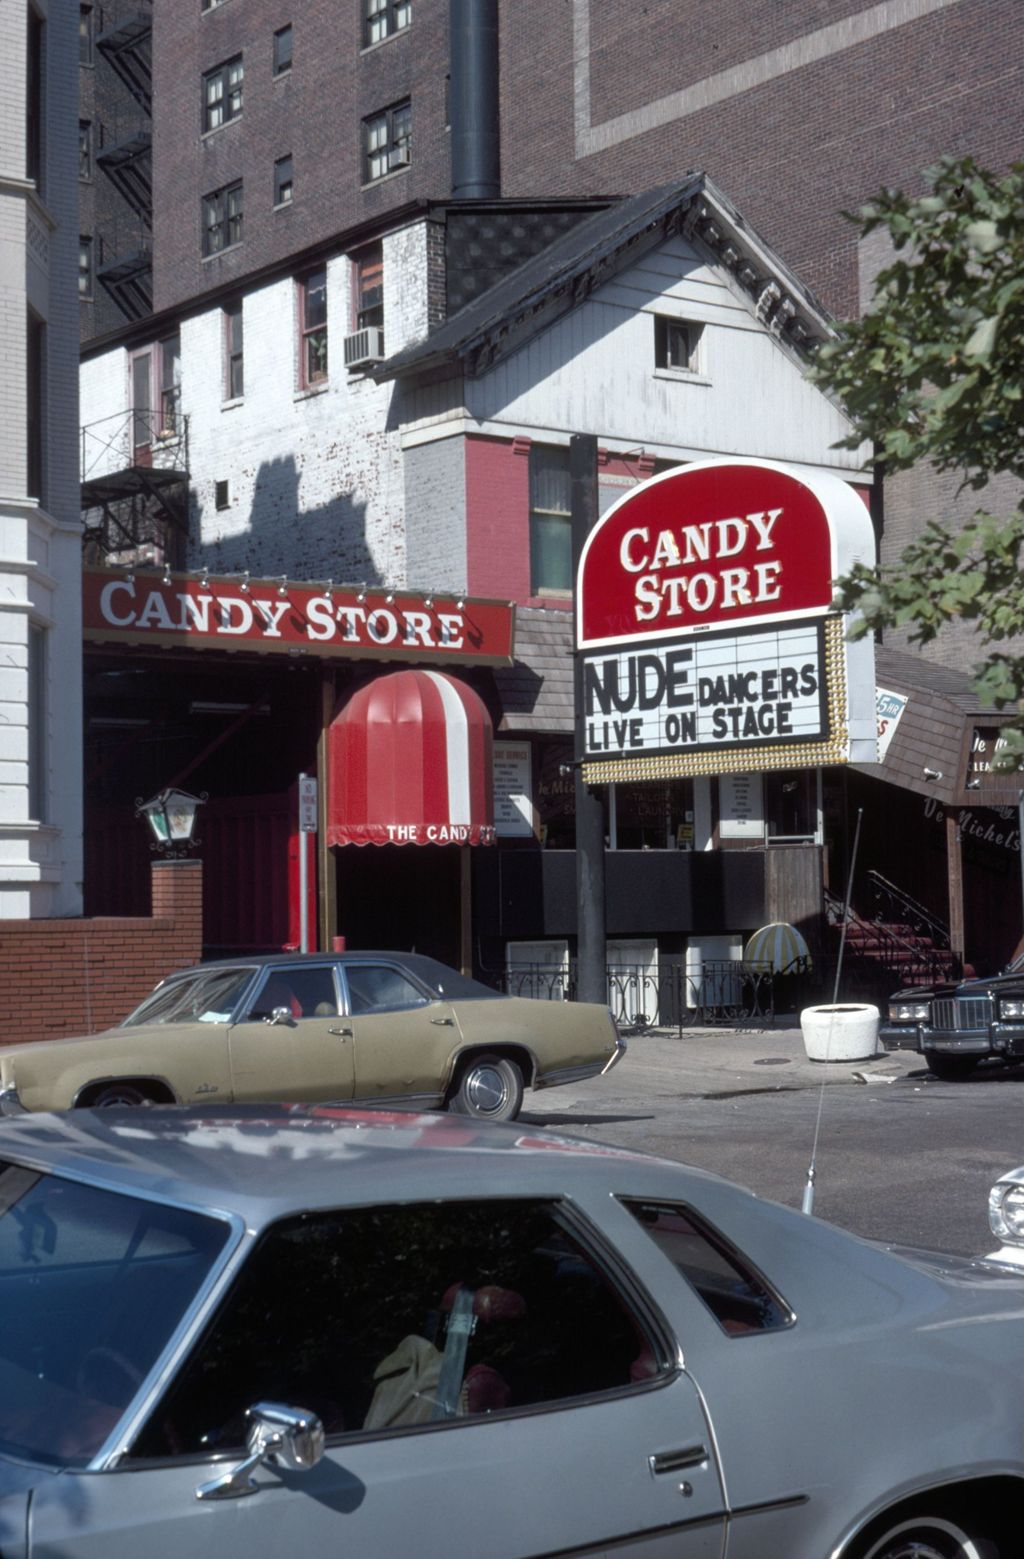 Miniature of Strip club "Candy Store", Wabash Street